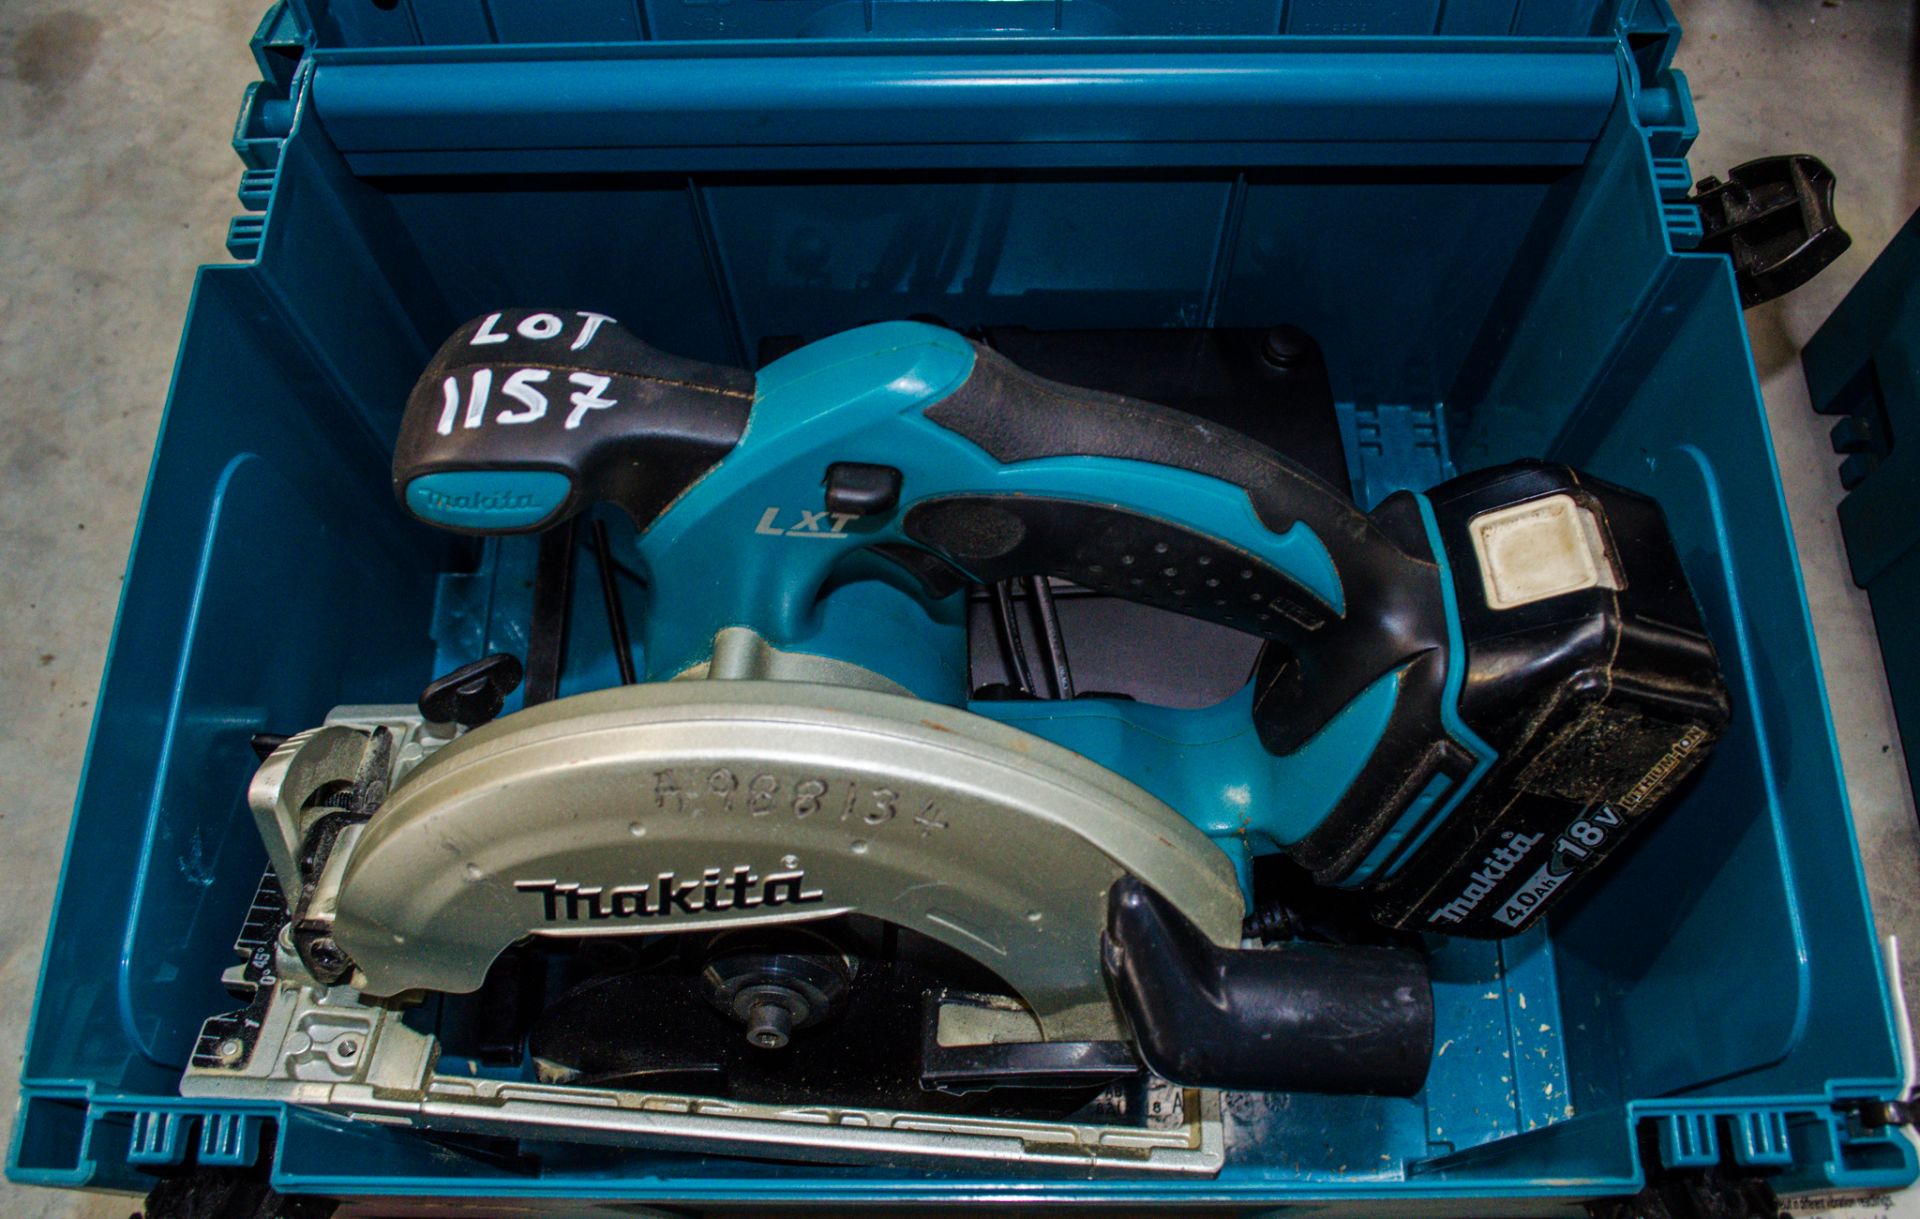 Makita DSS611 18v cordless circular saw c/w battery, charger and carry case A988134